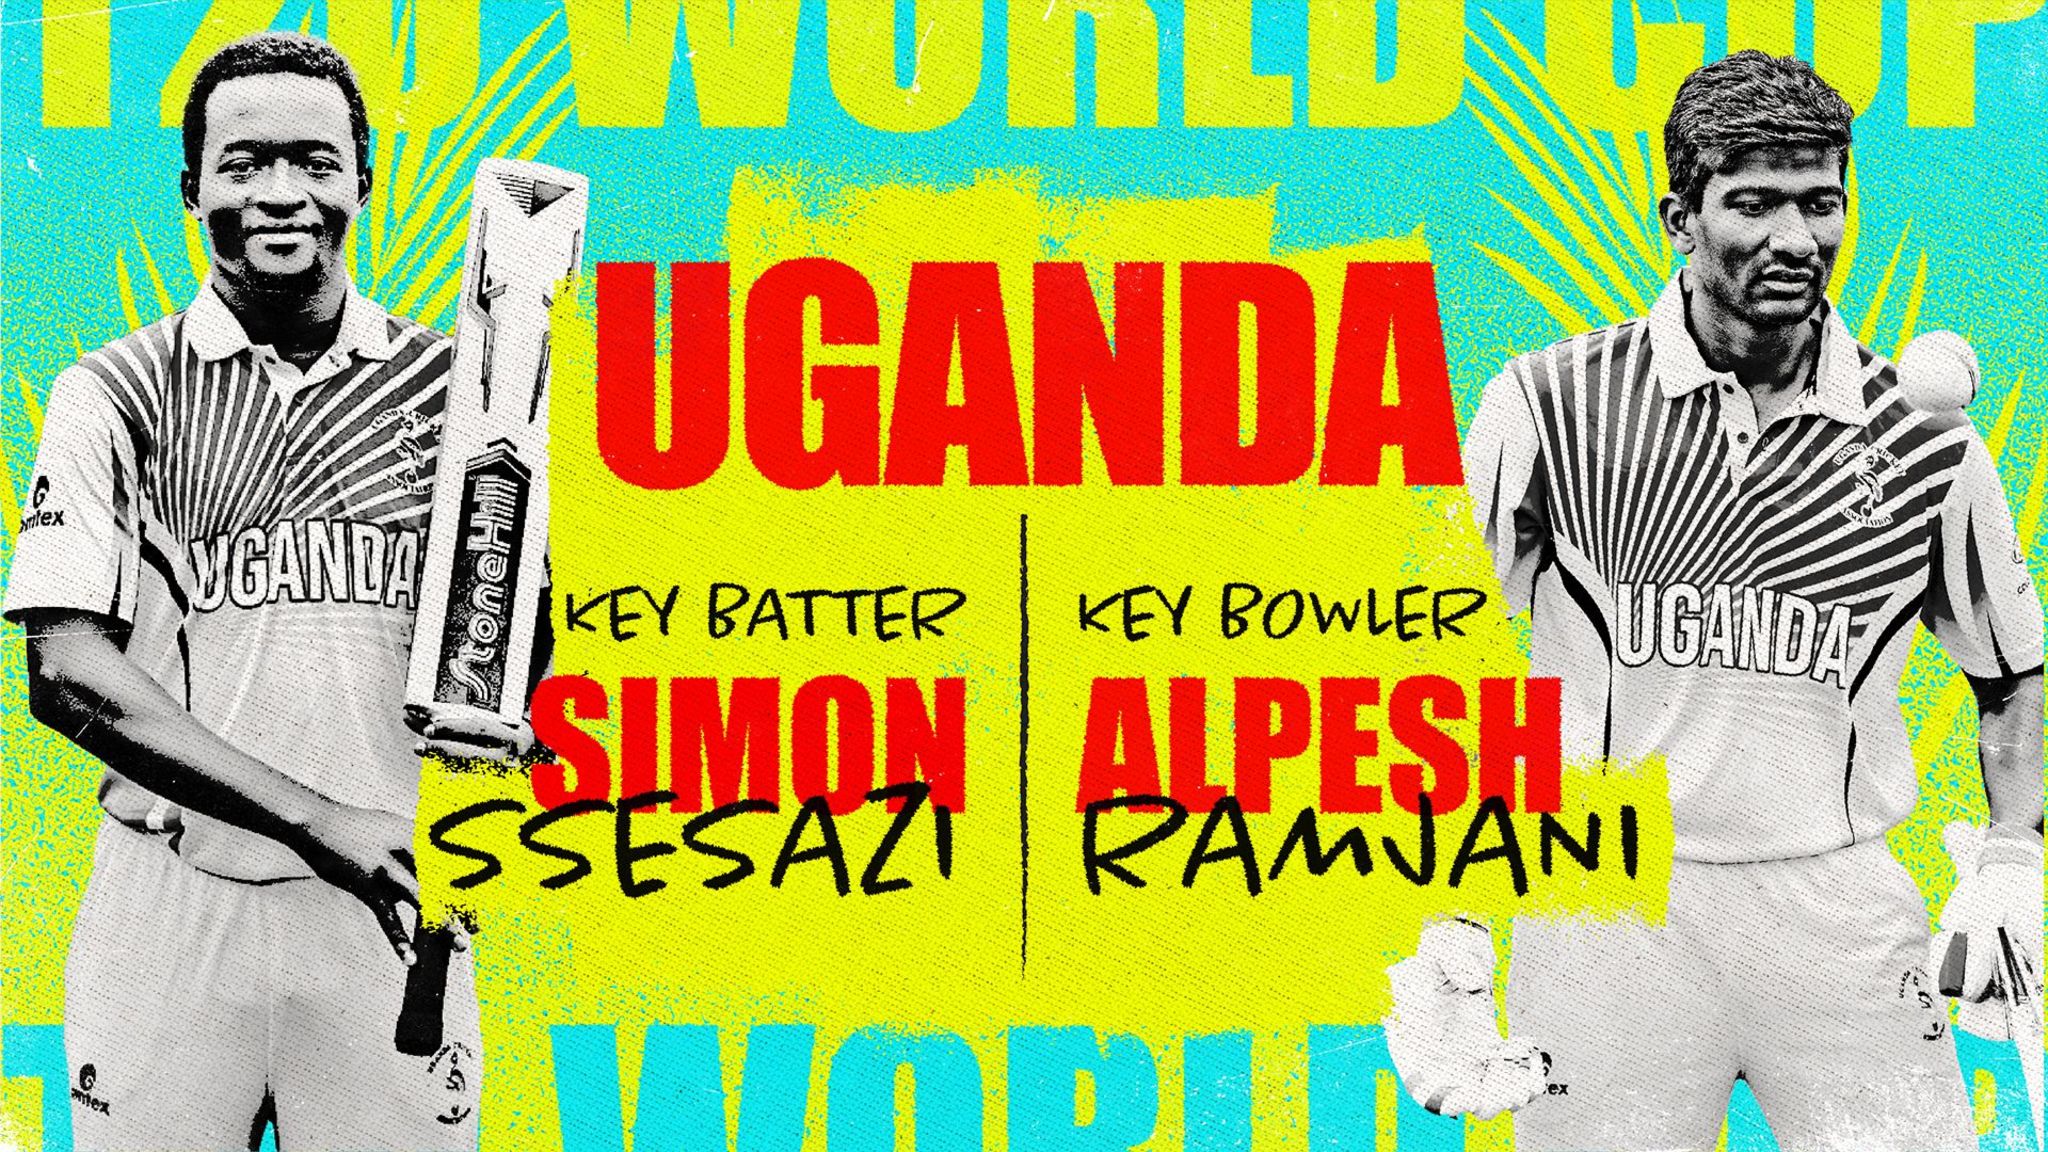 A graphic showing Simon Ssesazi and Alpesh Ramjani as Uganda's key batter and bowler at the Men's T20 World Cup